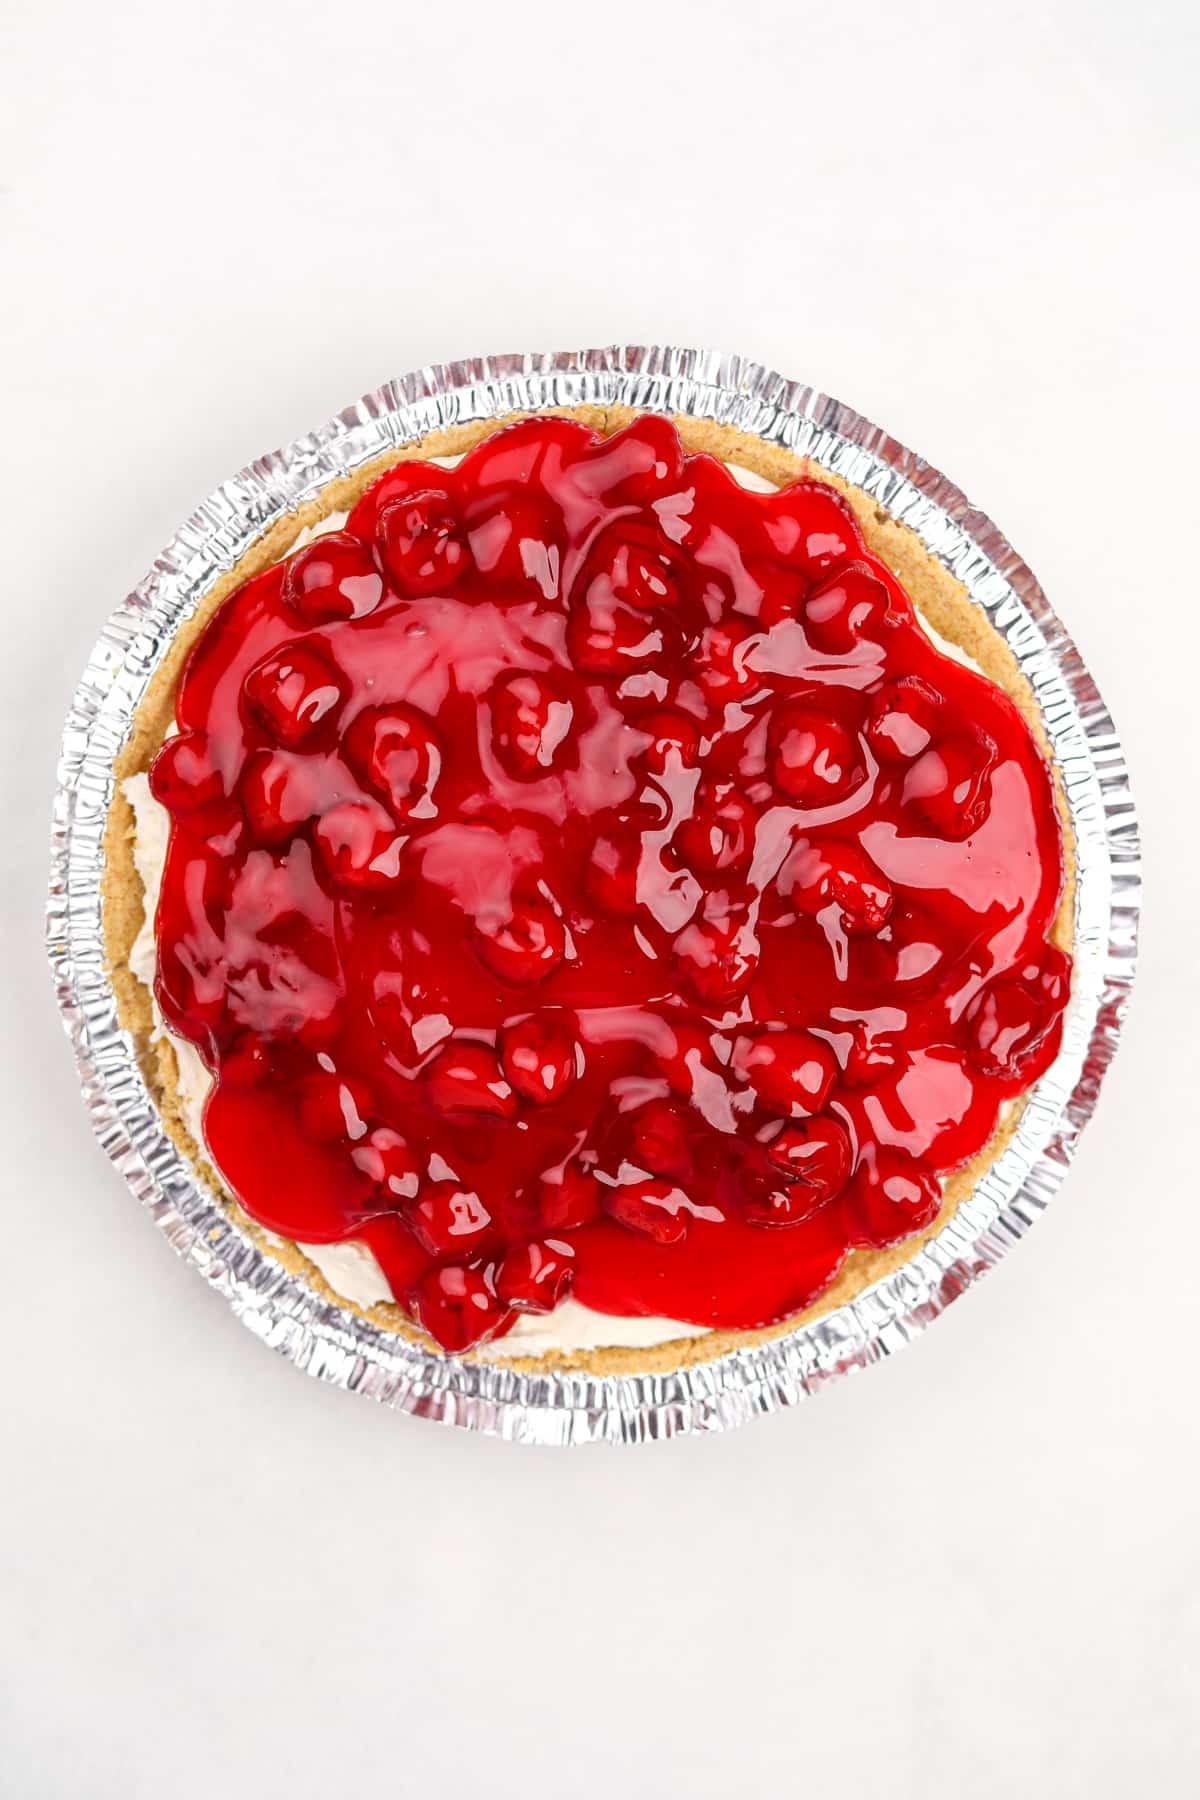 A cheesecake pie topped with cherry pie filling.